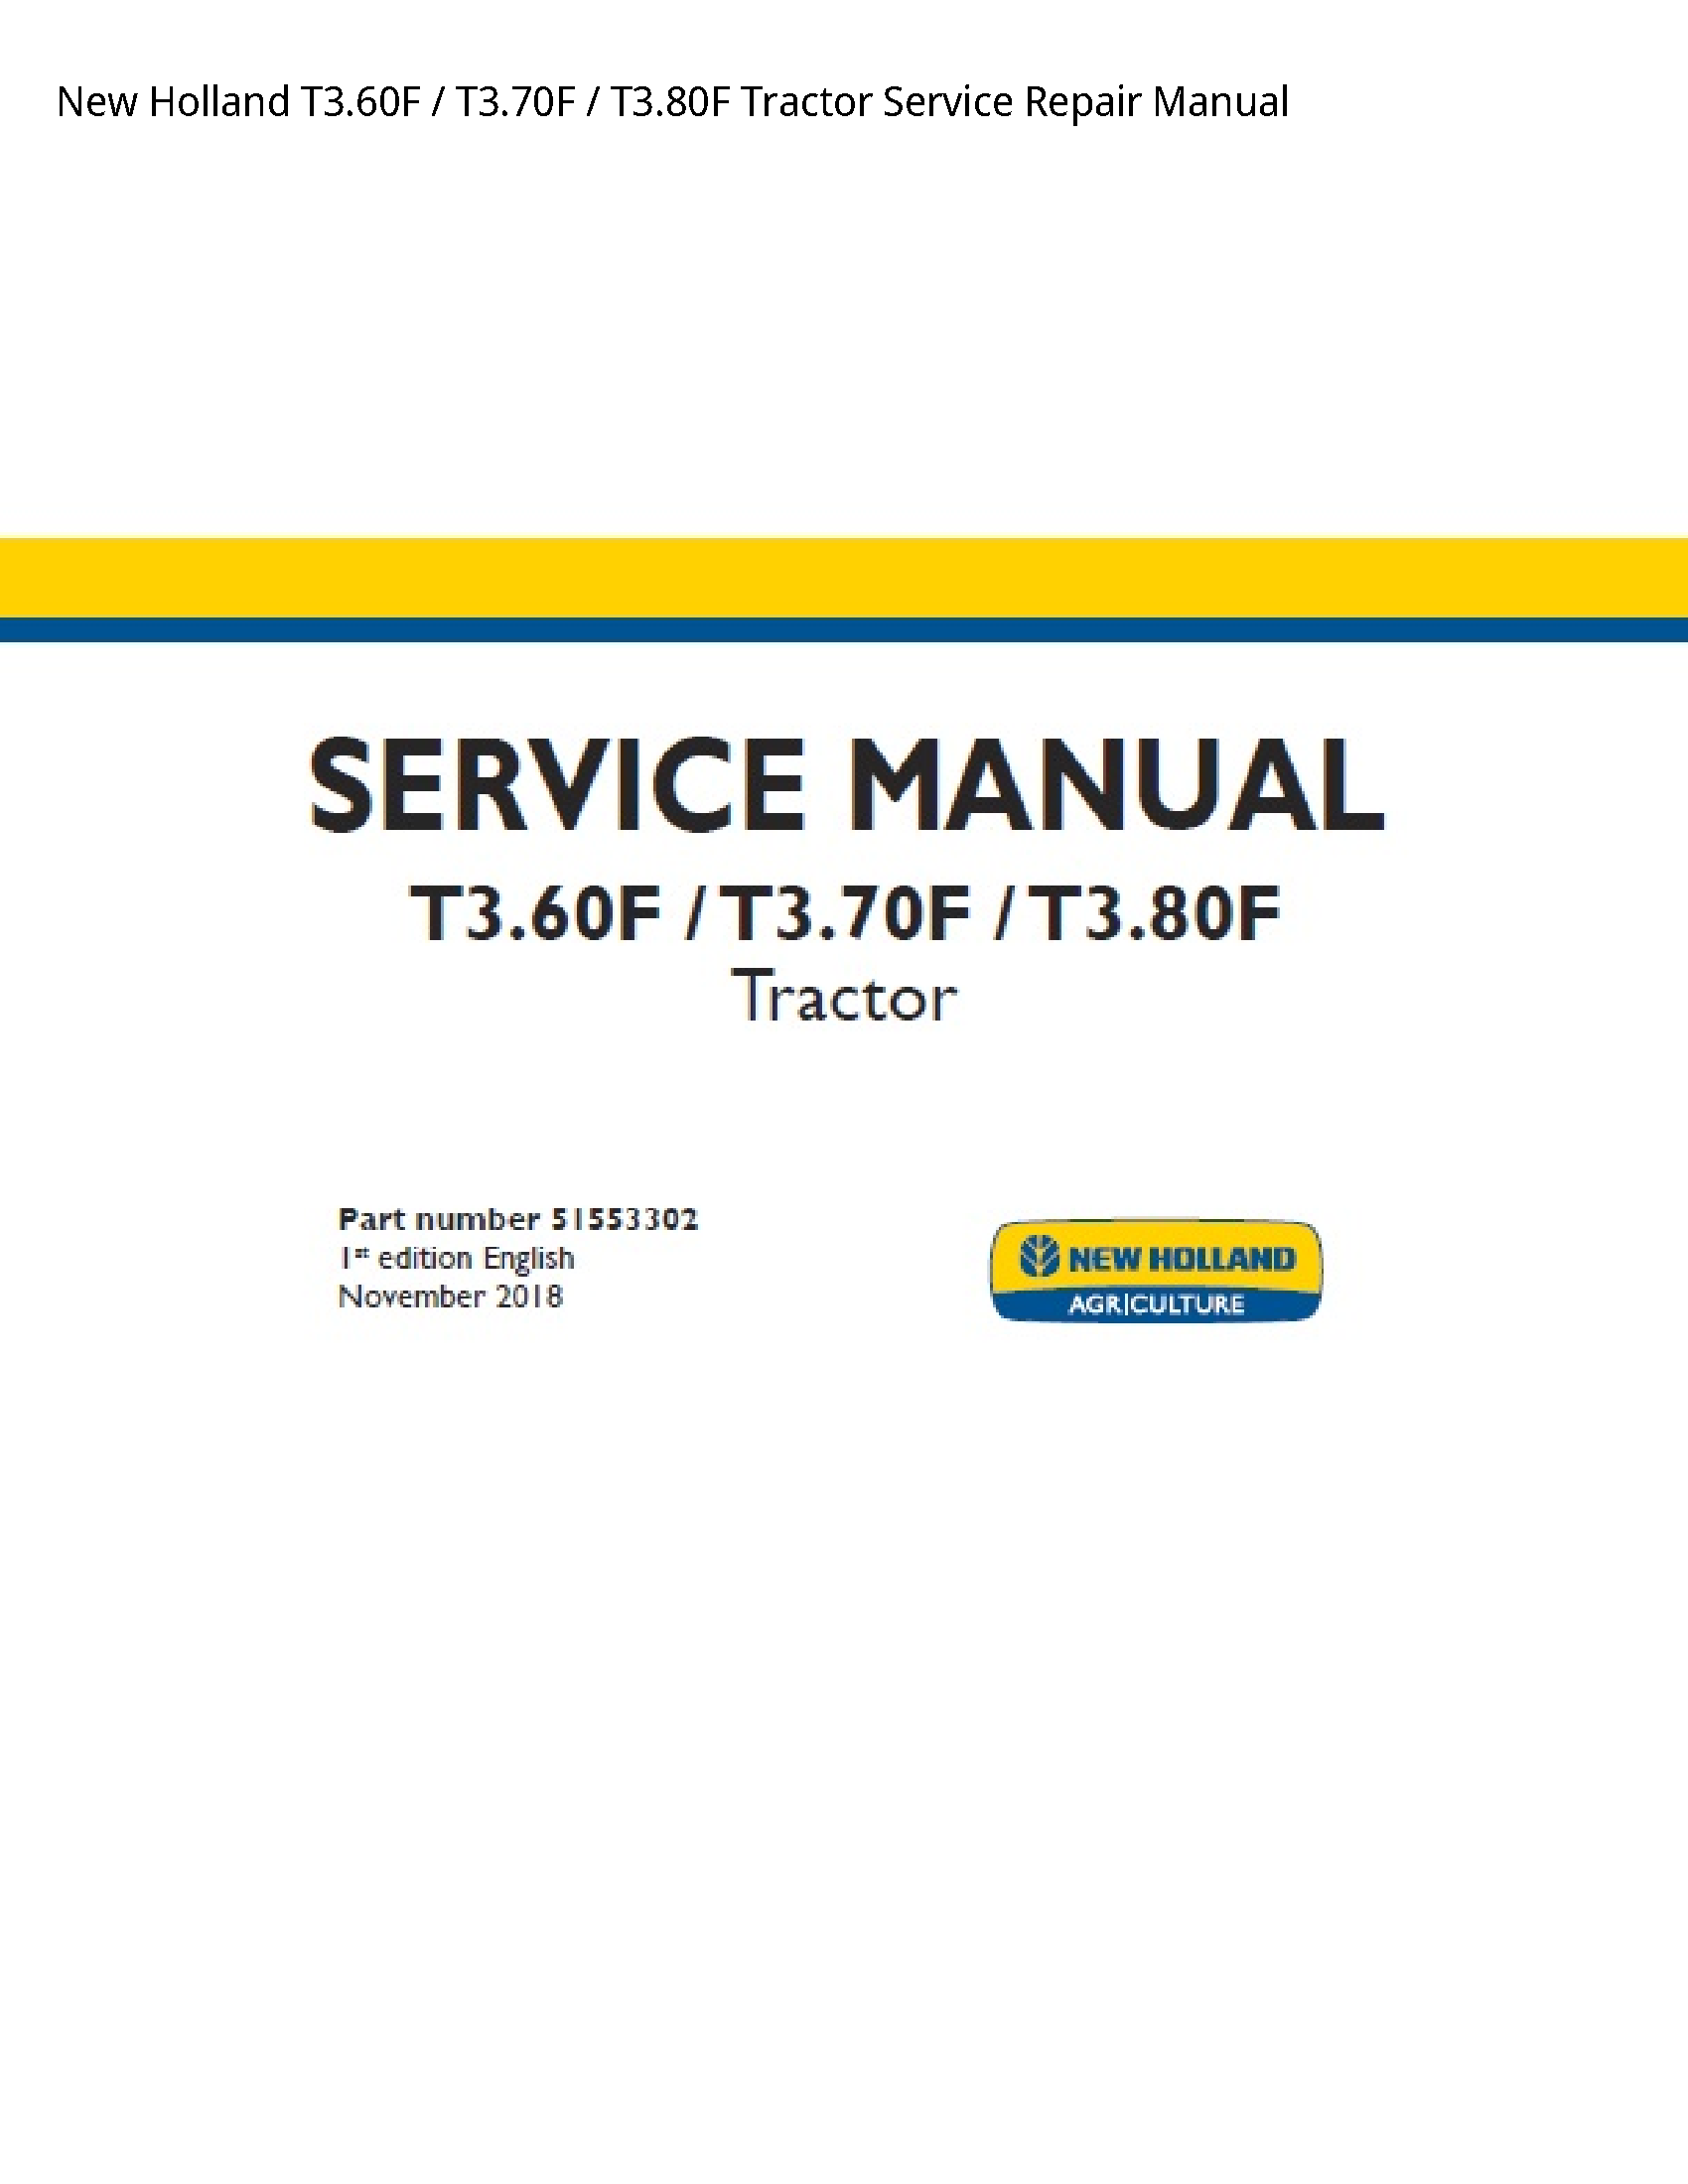 New Holland T3.60F Tractor manual